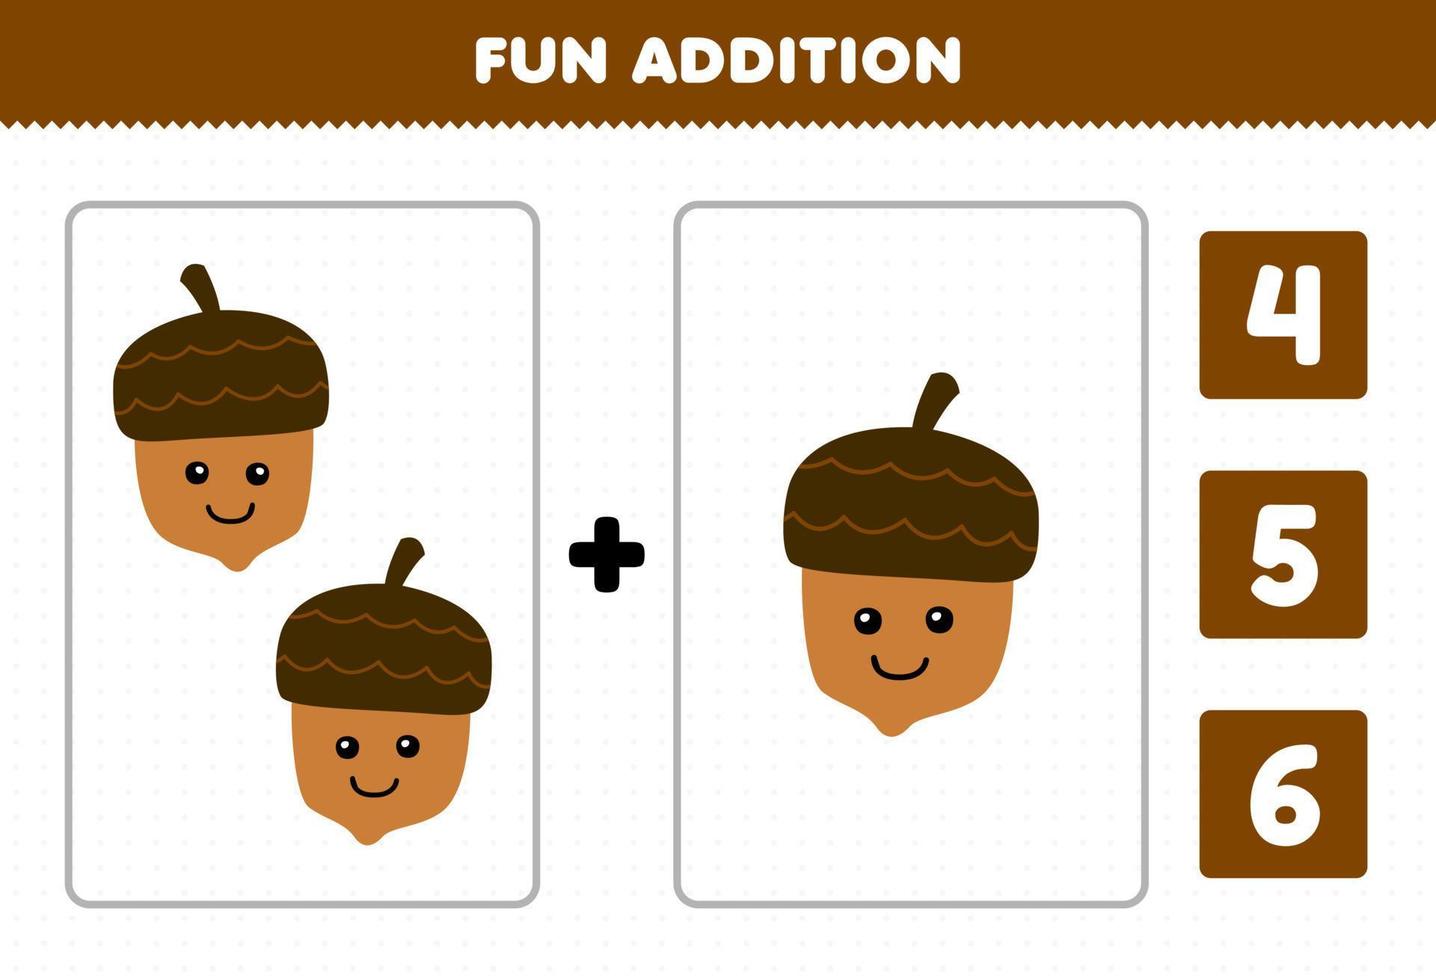 Education game for children fun addition by count and choose the correct answer of cute cartoon acorn printable nature worksheet vector